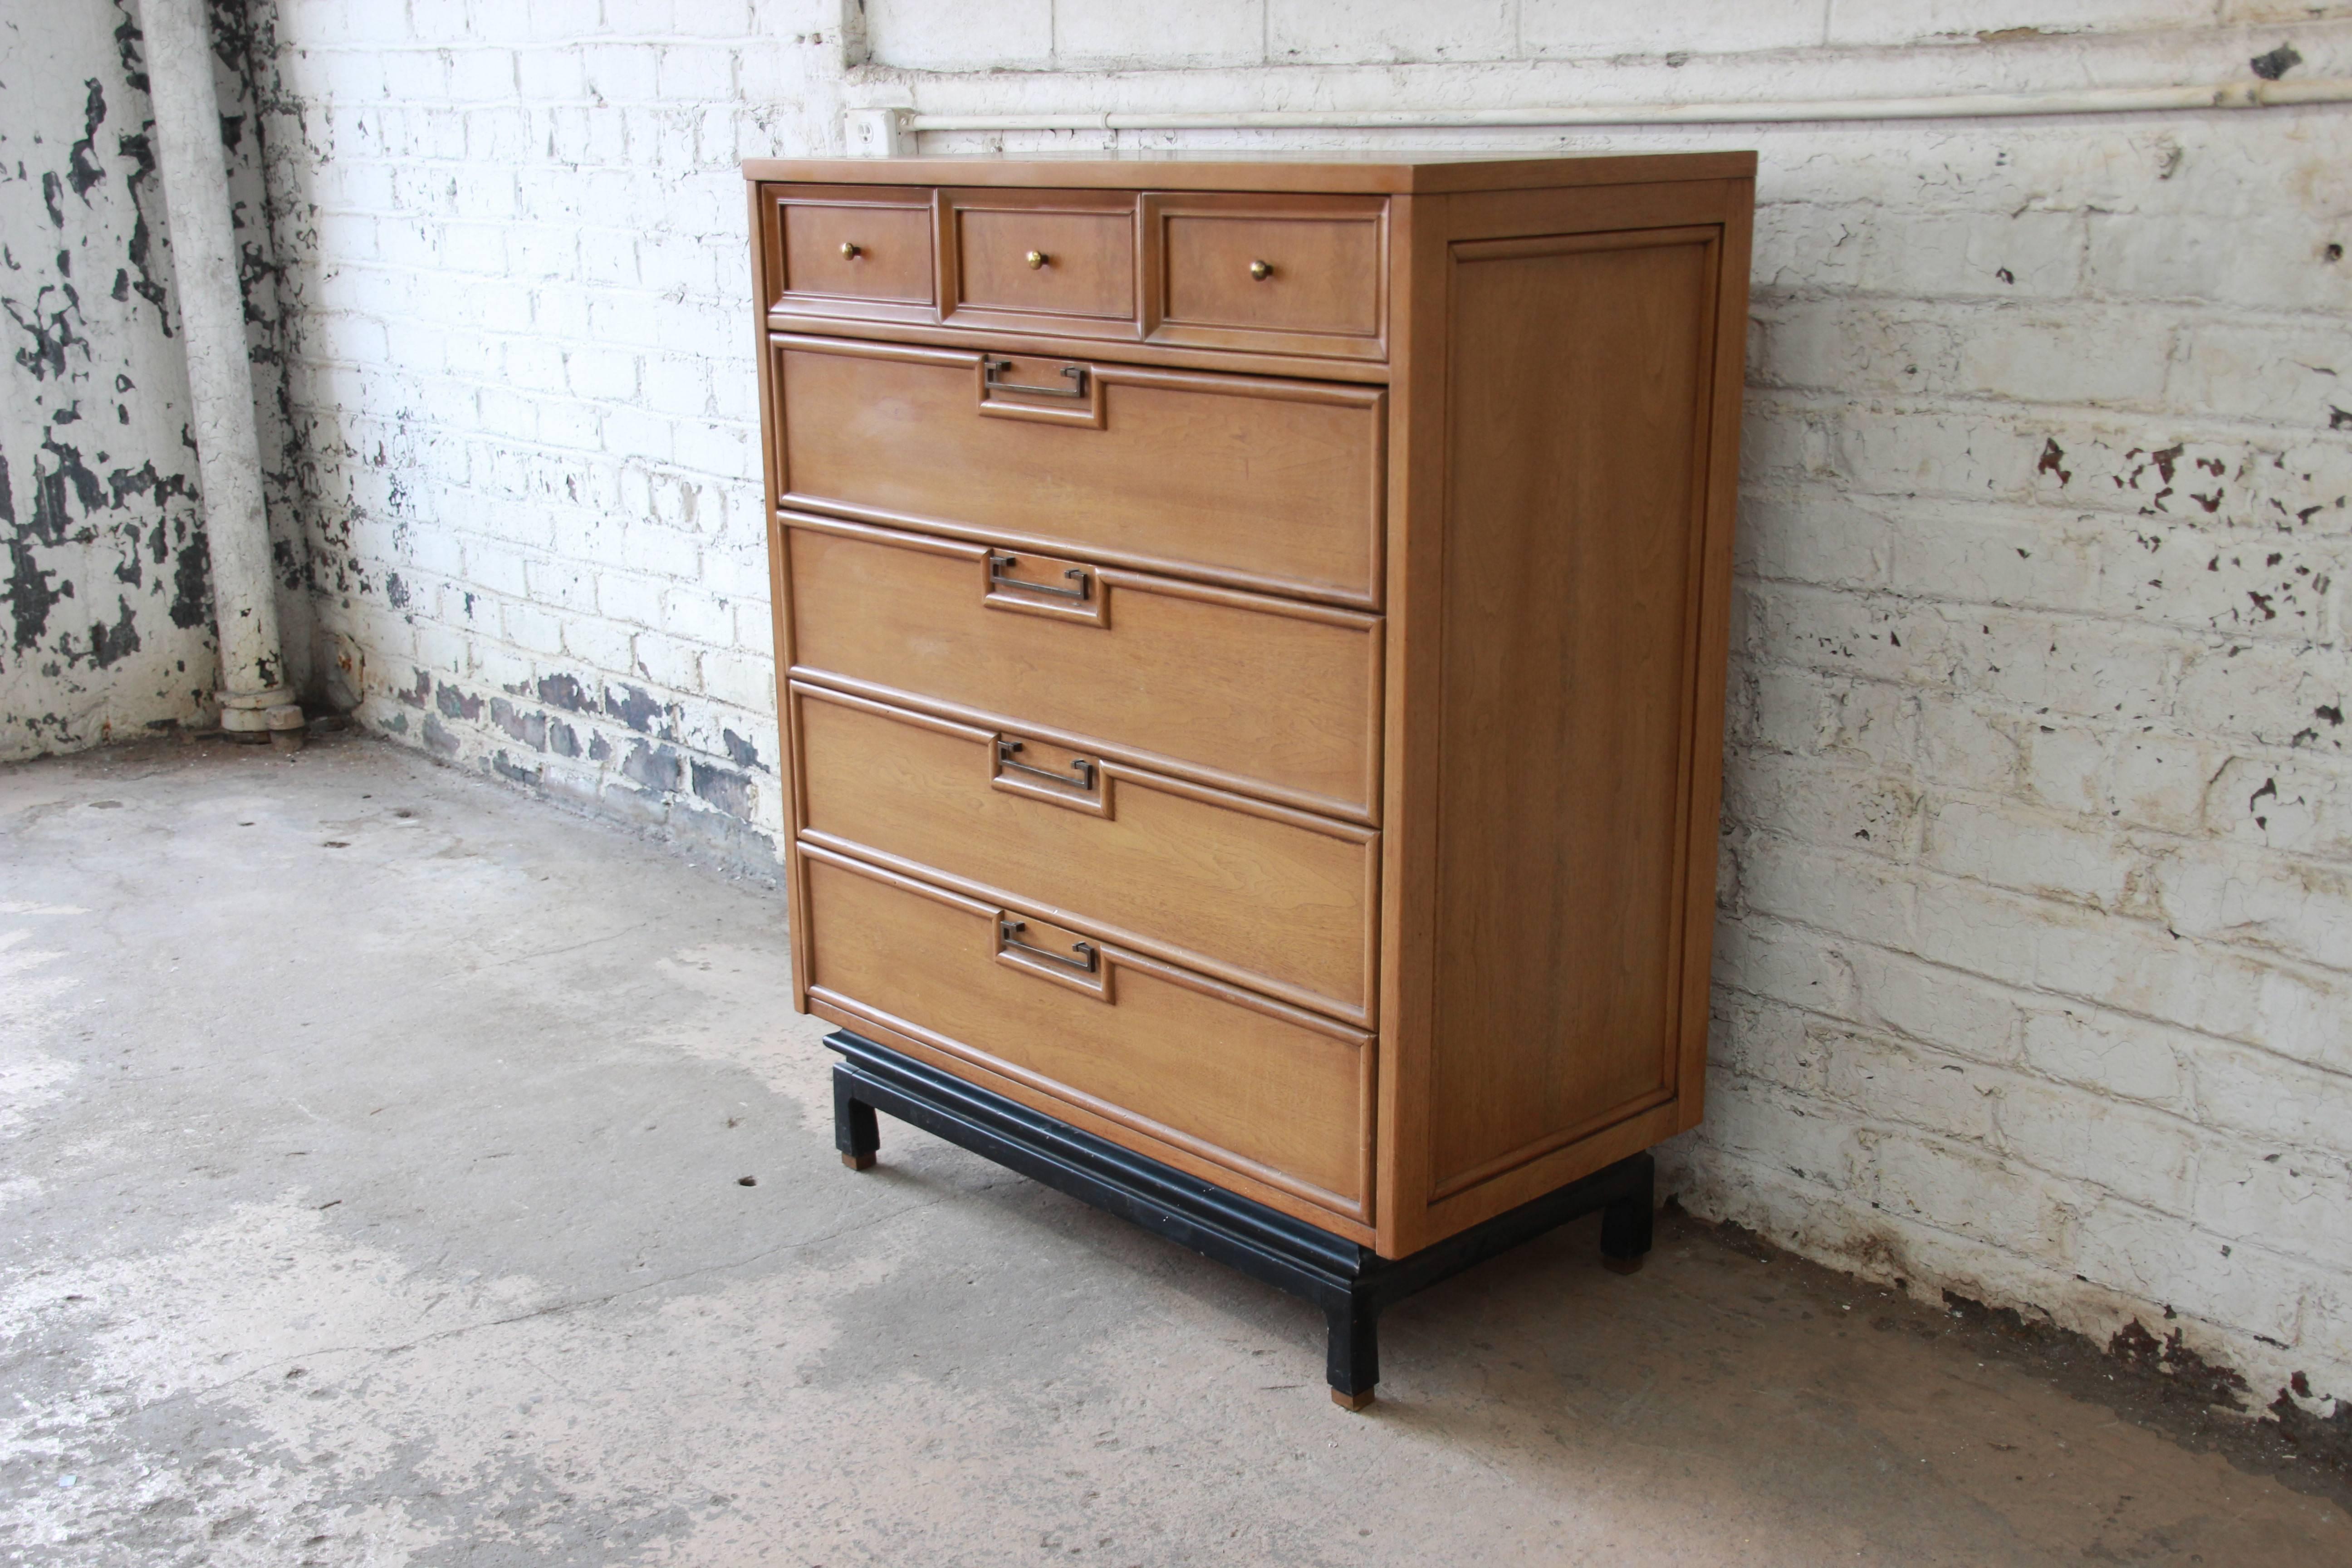 A gorgeous Mid-Century Modern Hollywood Regency chinoiserie highboy dresser by American of Martinsville. The dresser features beautiful bleached walnut wood grain and original brass drawer pulls. It is accented with a sculpted black lacquered base,